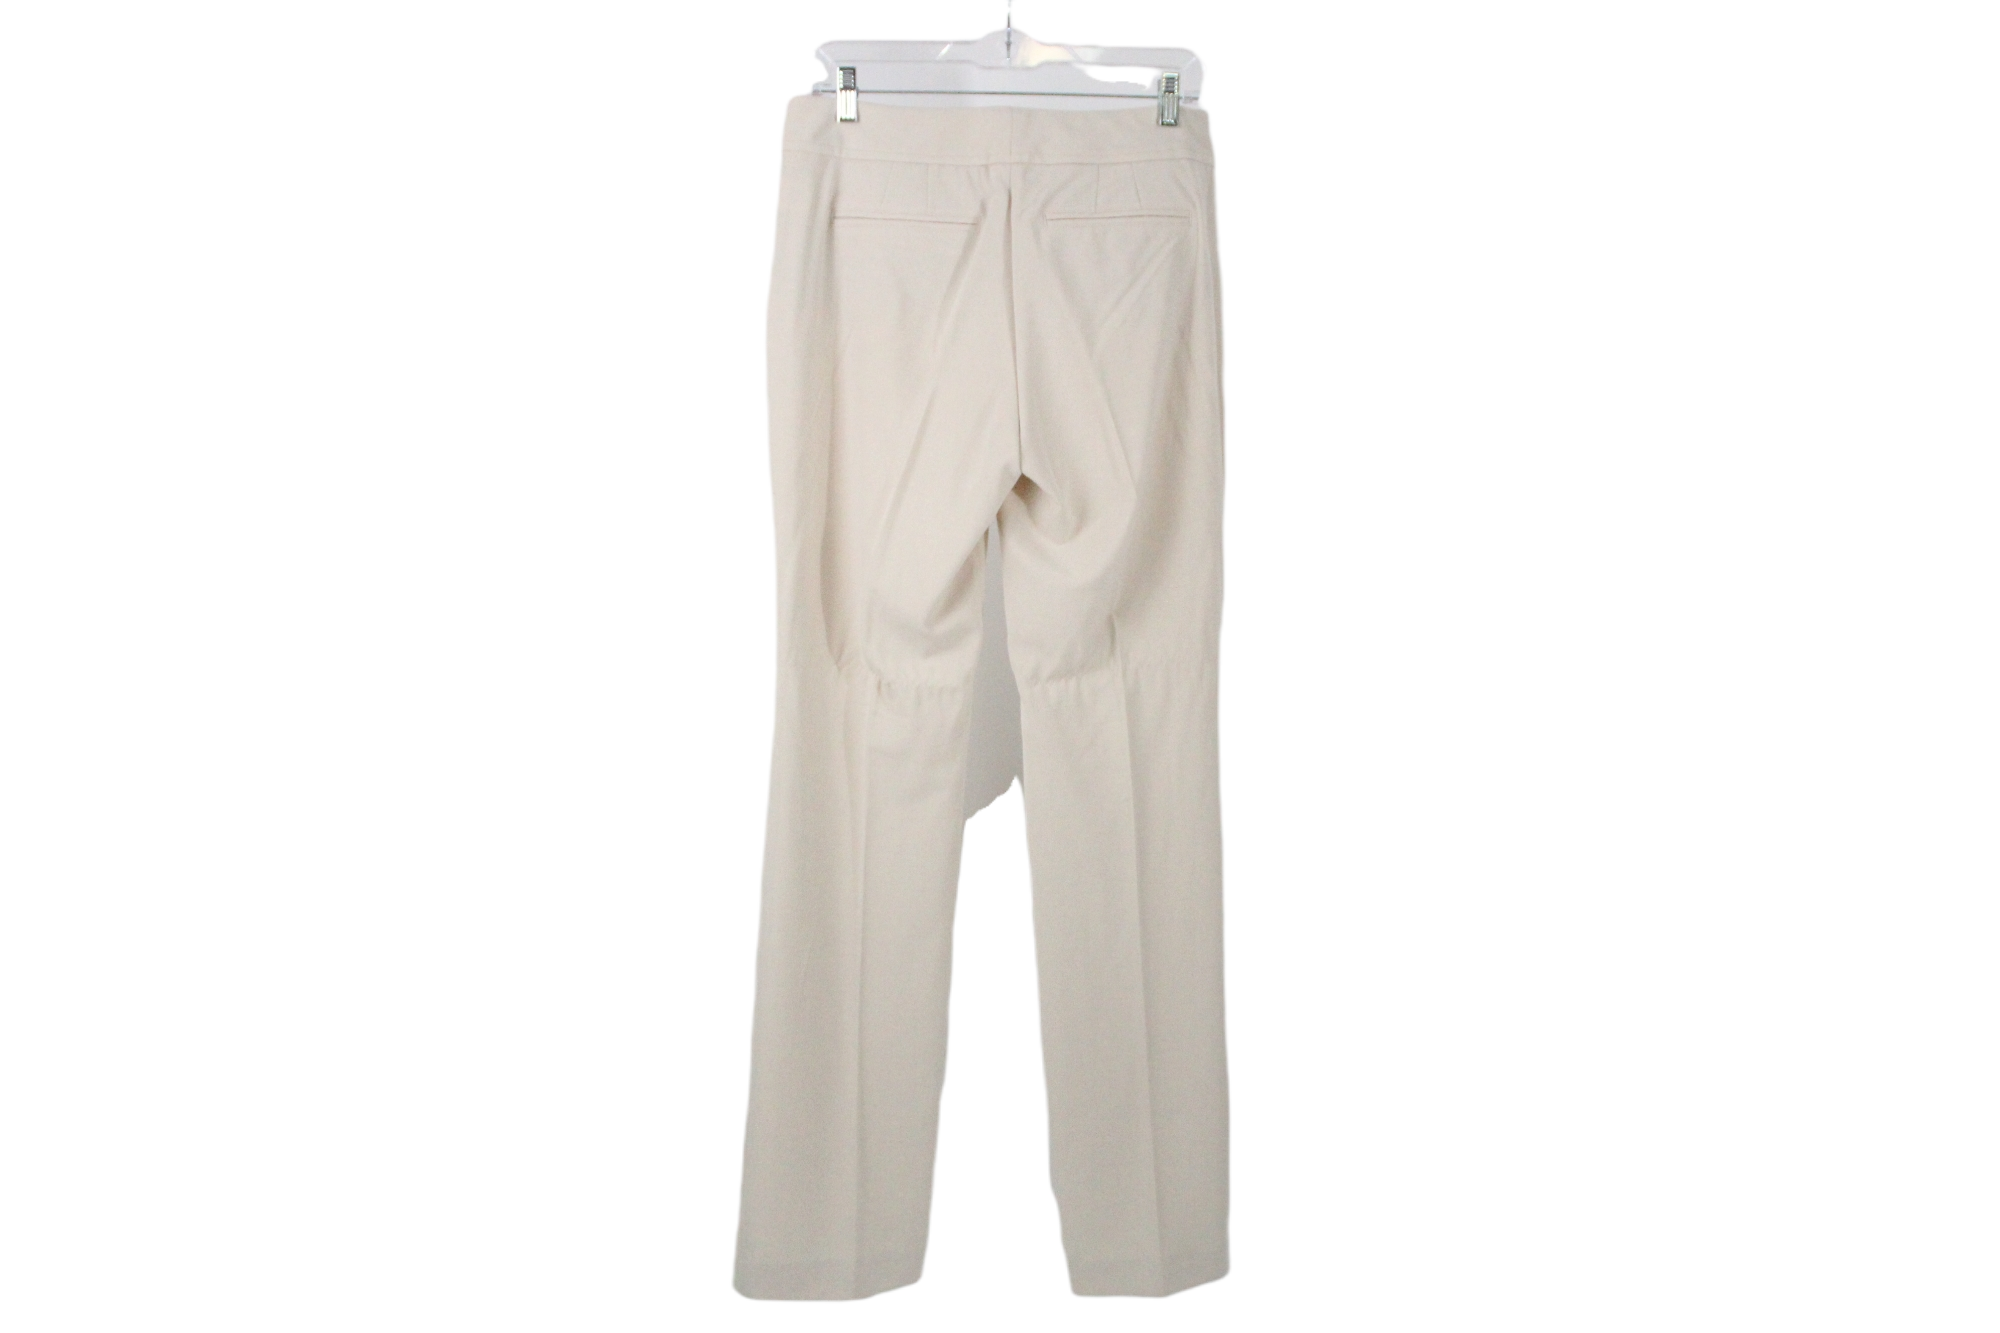 NEW New York & Company Stretch Beige Pant | 4 Tall